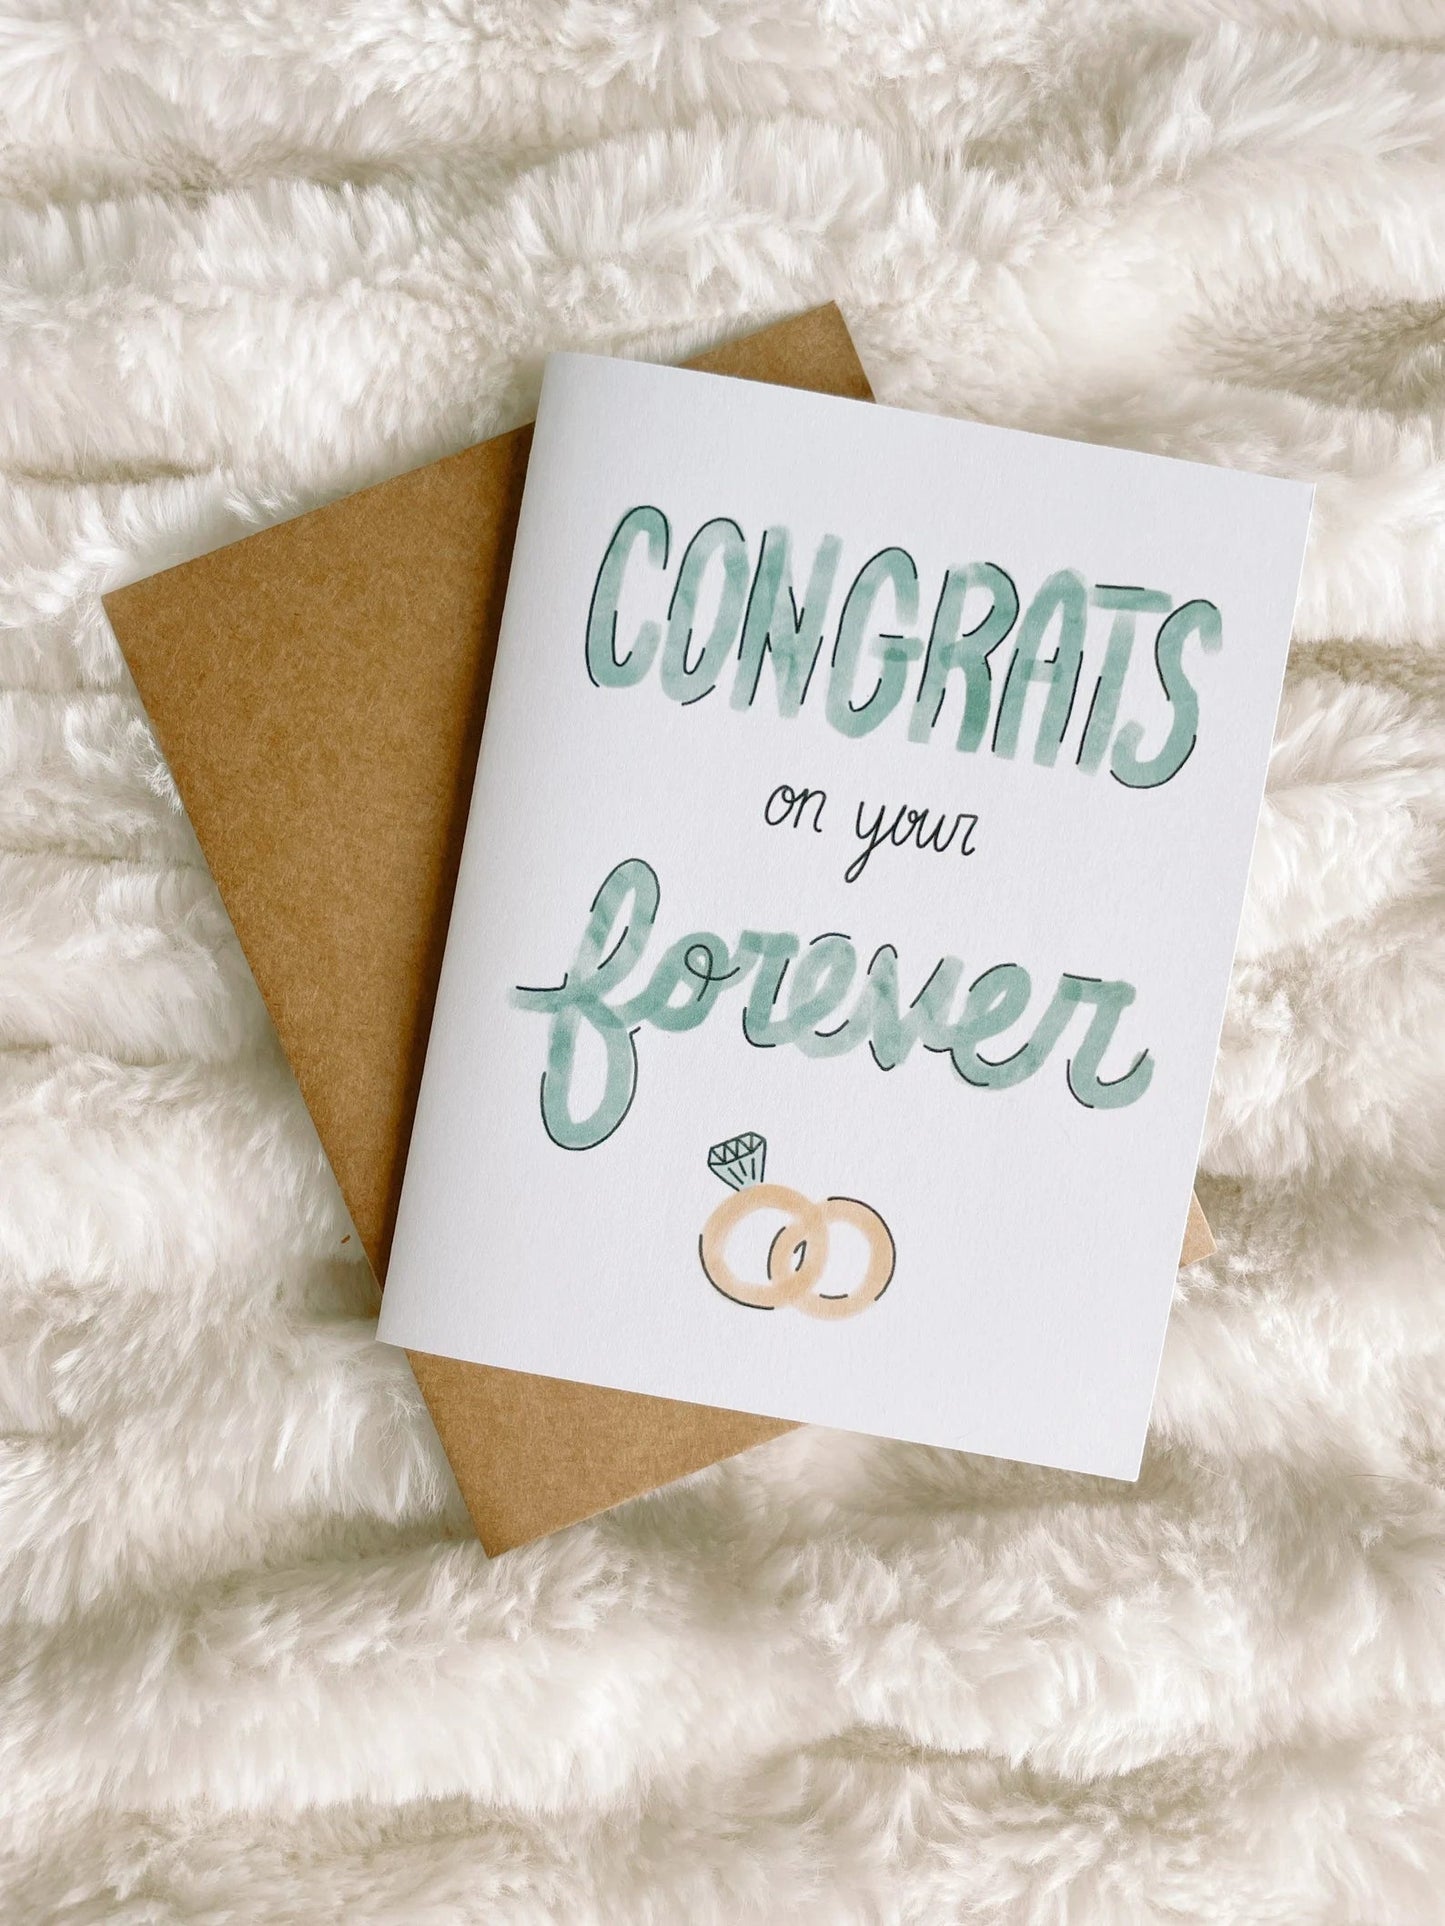 Congrats on Forever Card - The Dragonfly Boutique